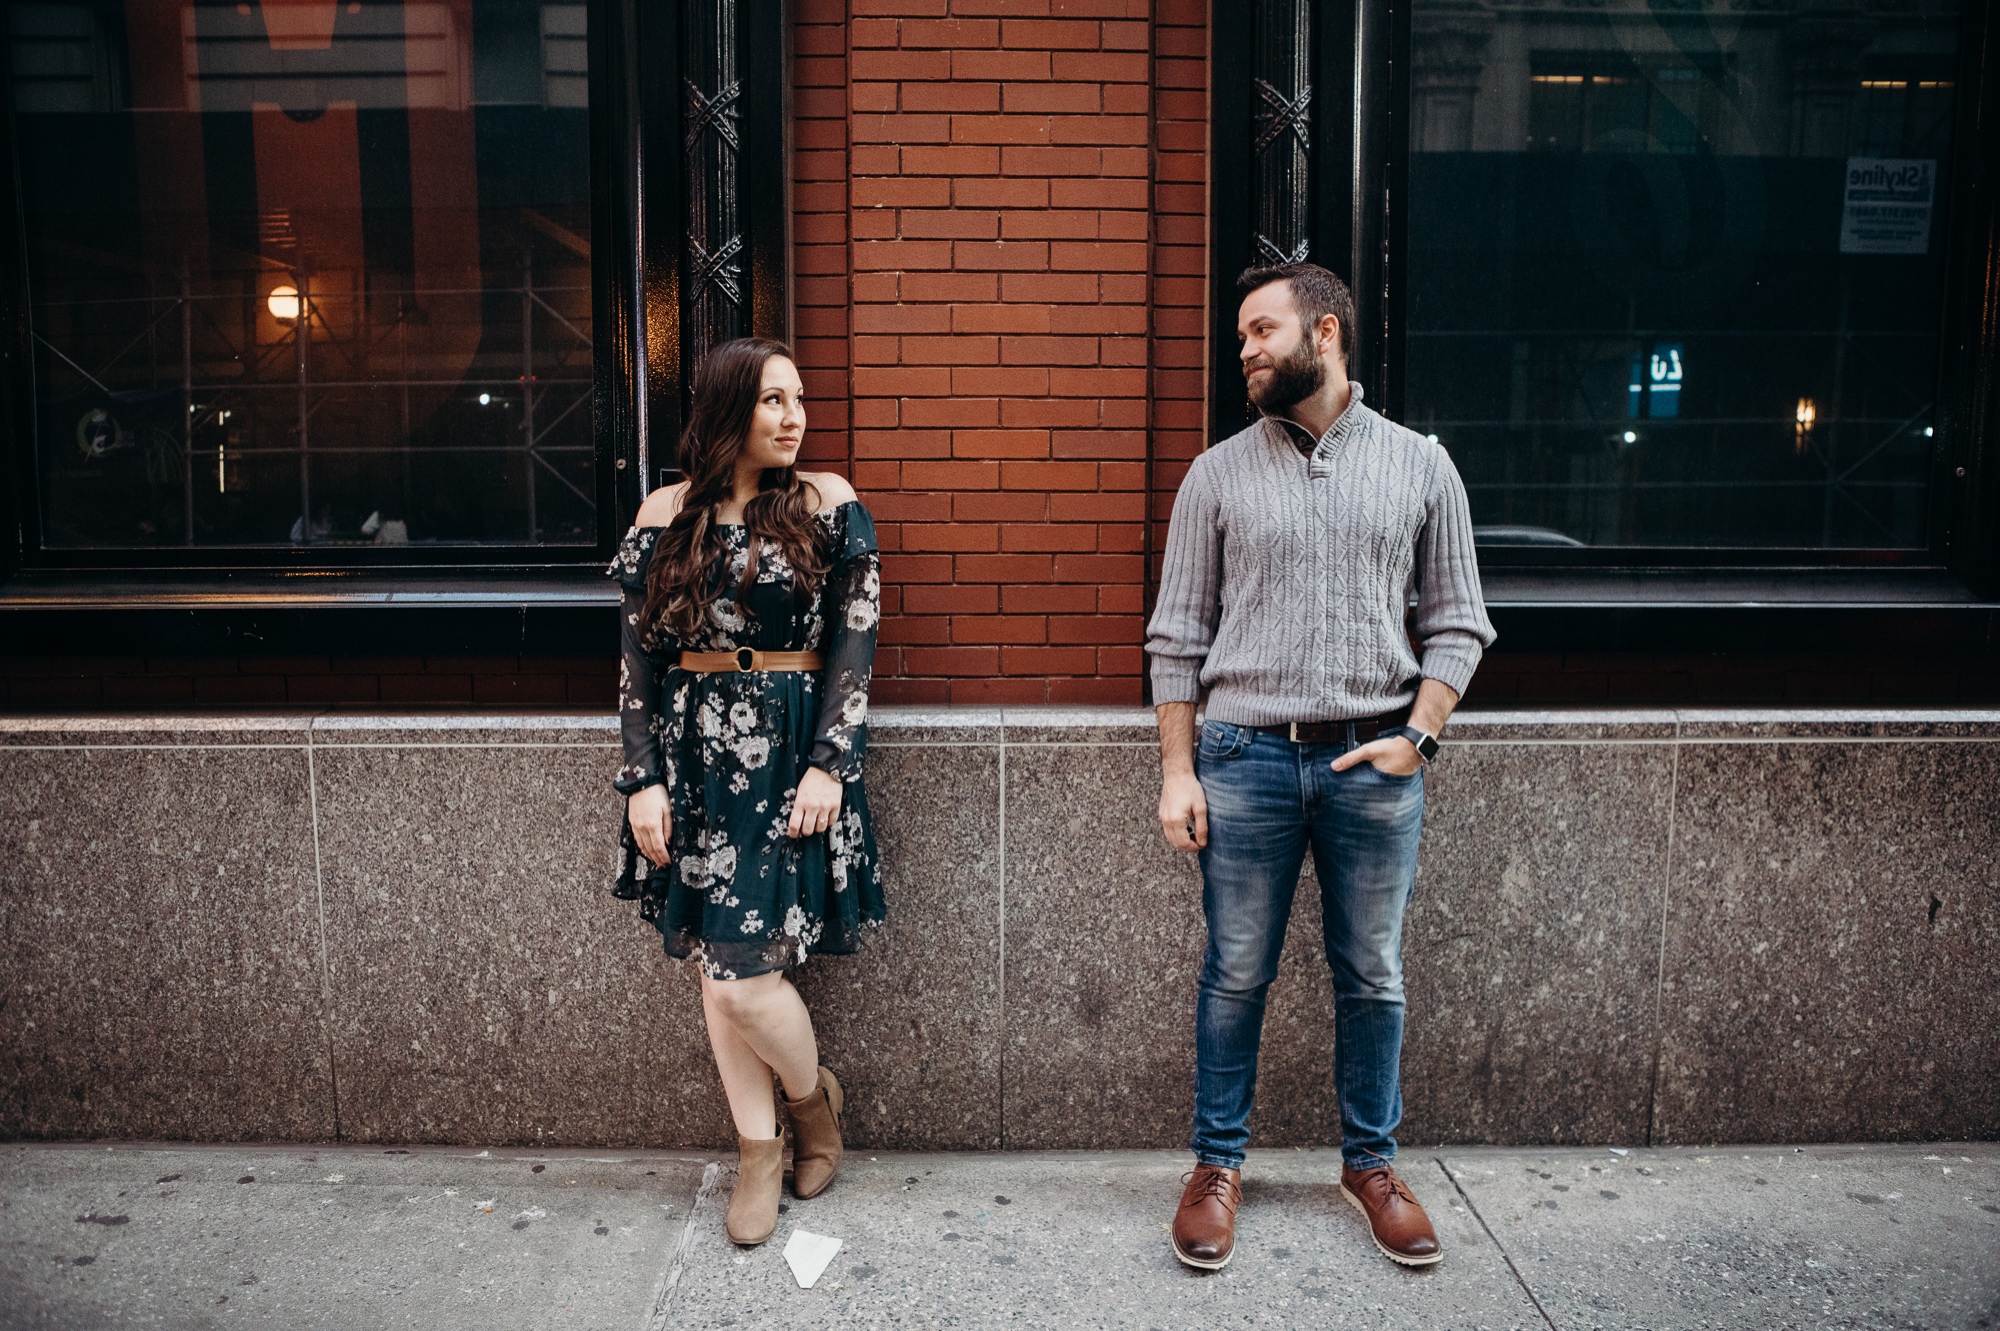 engagement photos of a couple in front of the lyric theater in times square, new york city